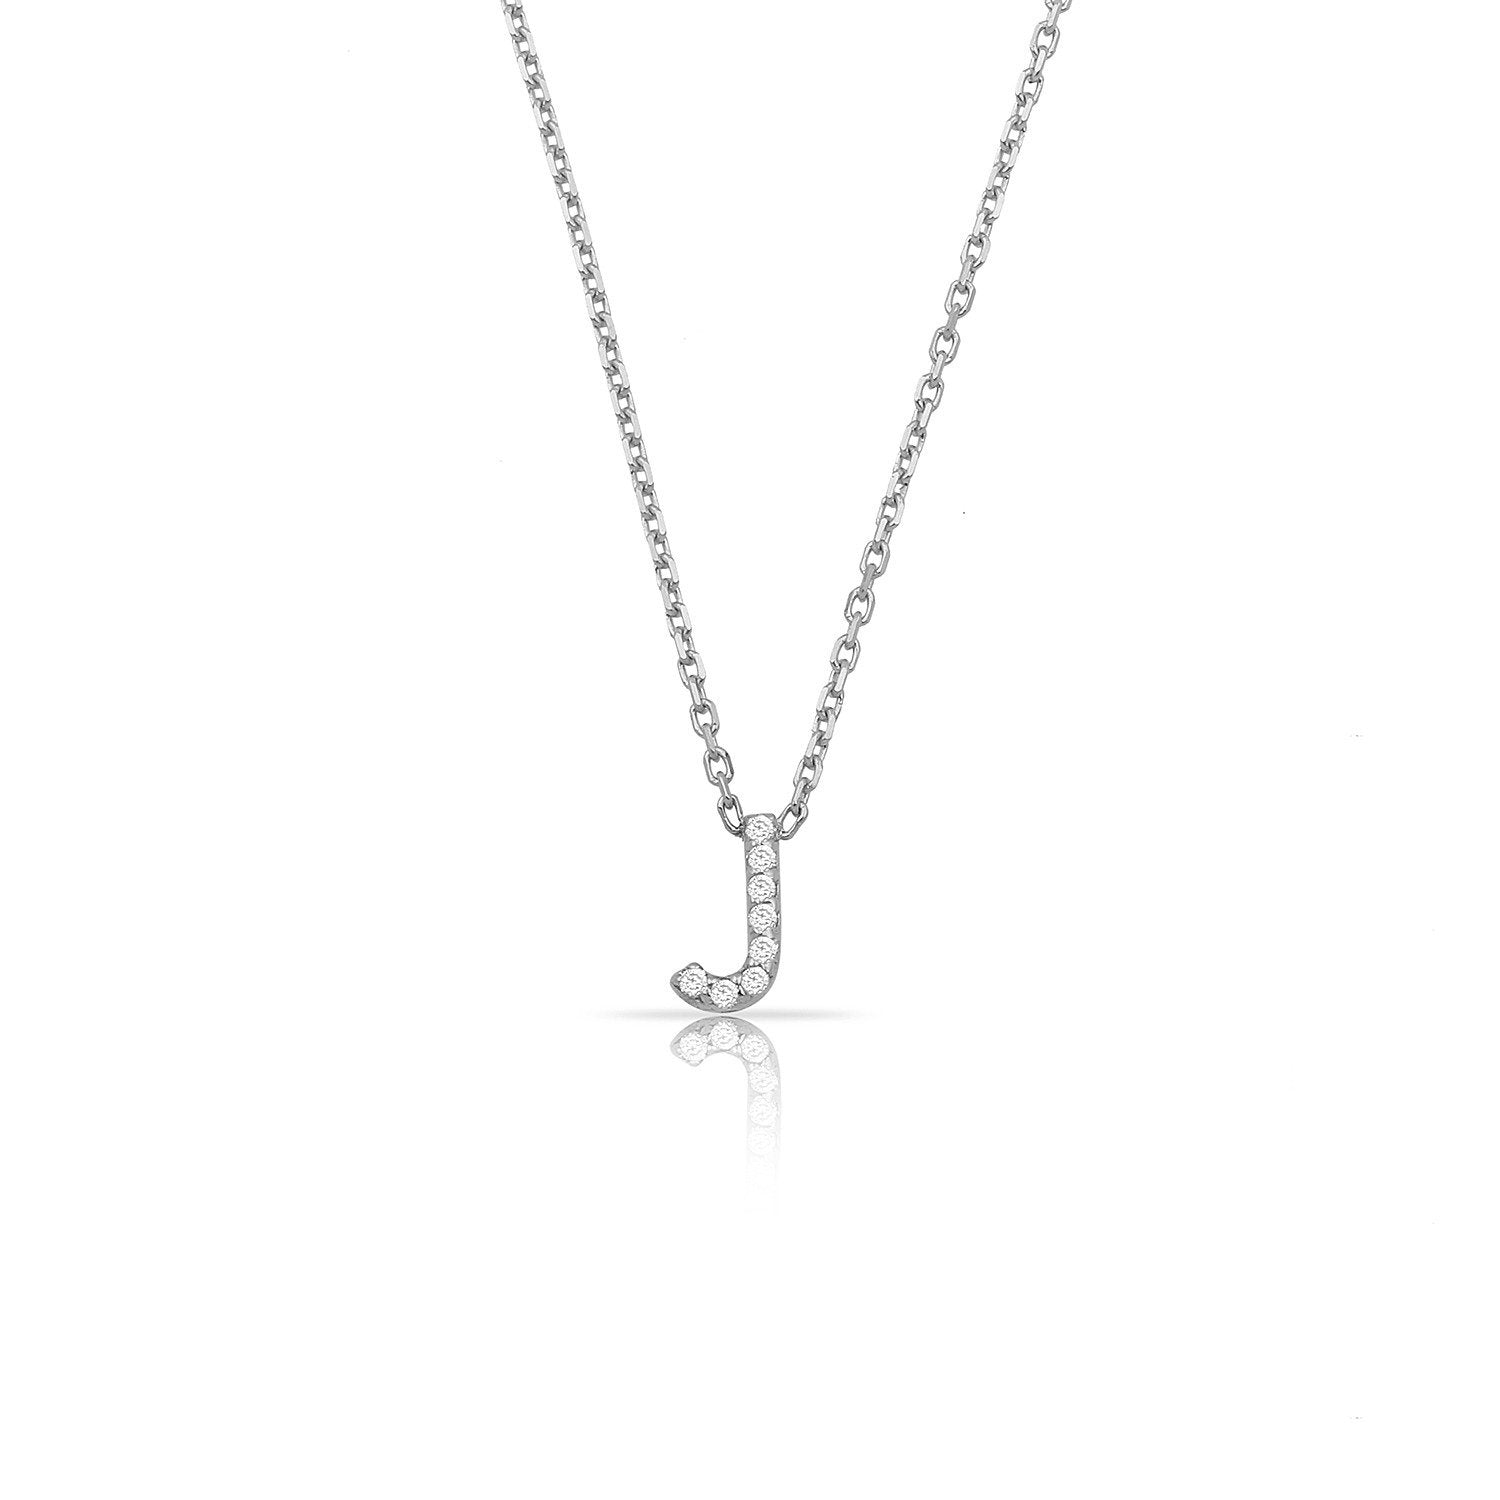 TSK Perry St. Diamond Initial Necklace JEWELRY The Sis Kiss 14k White Gold